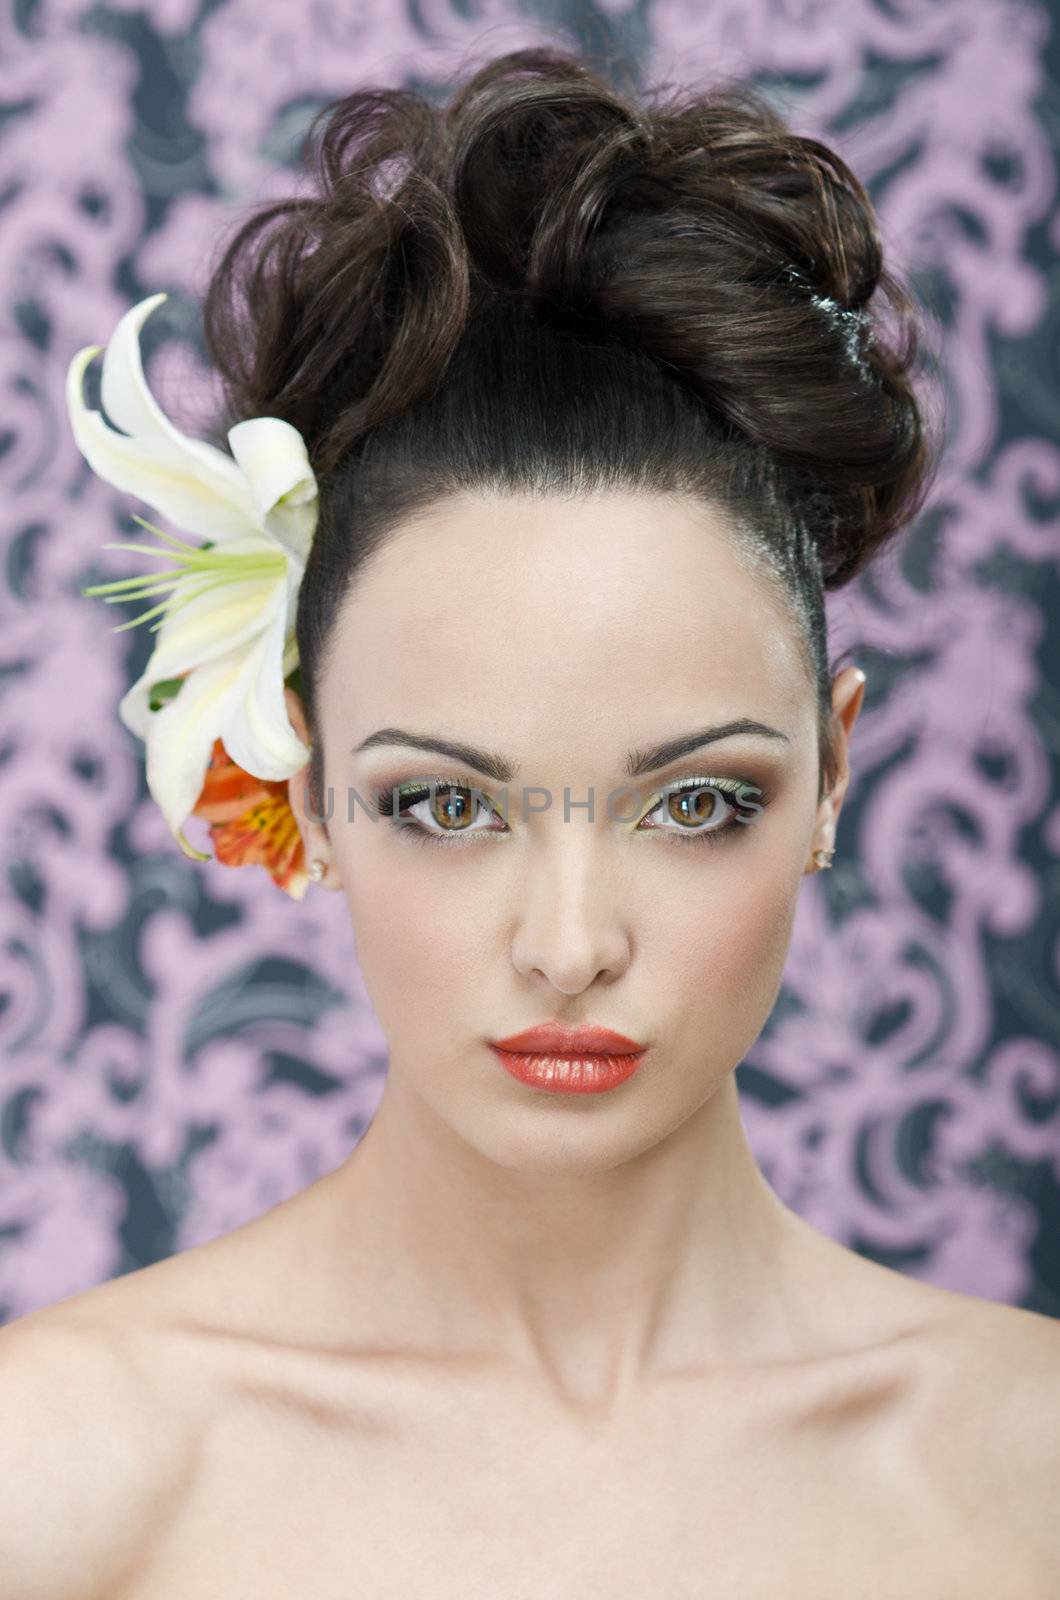 Close up beauty head shot of 20 yeared young adult woman with make-up, hair style and lily flowers in hair. Hi-end retouch except flying hairs around the head